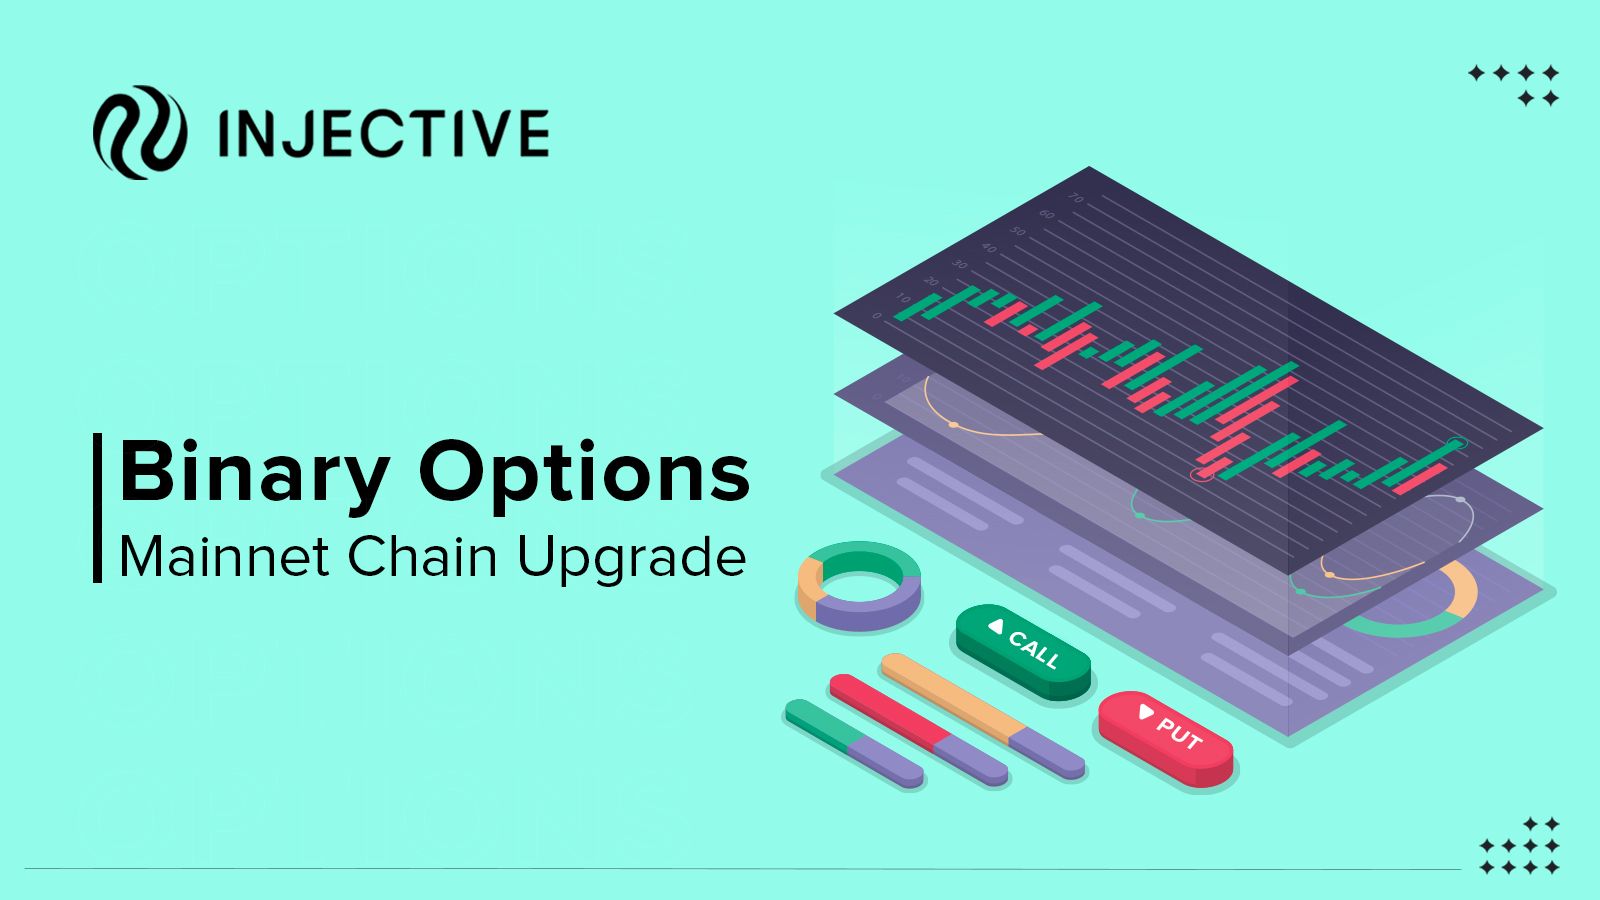 Overview: Binary Options